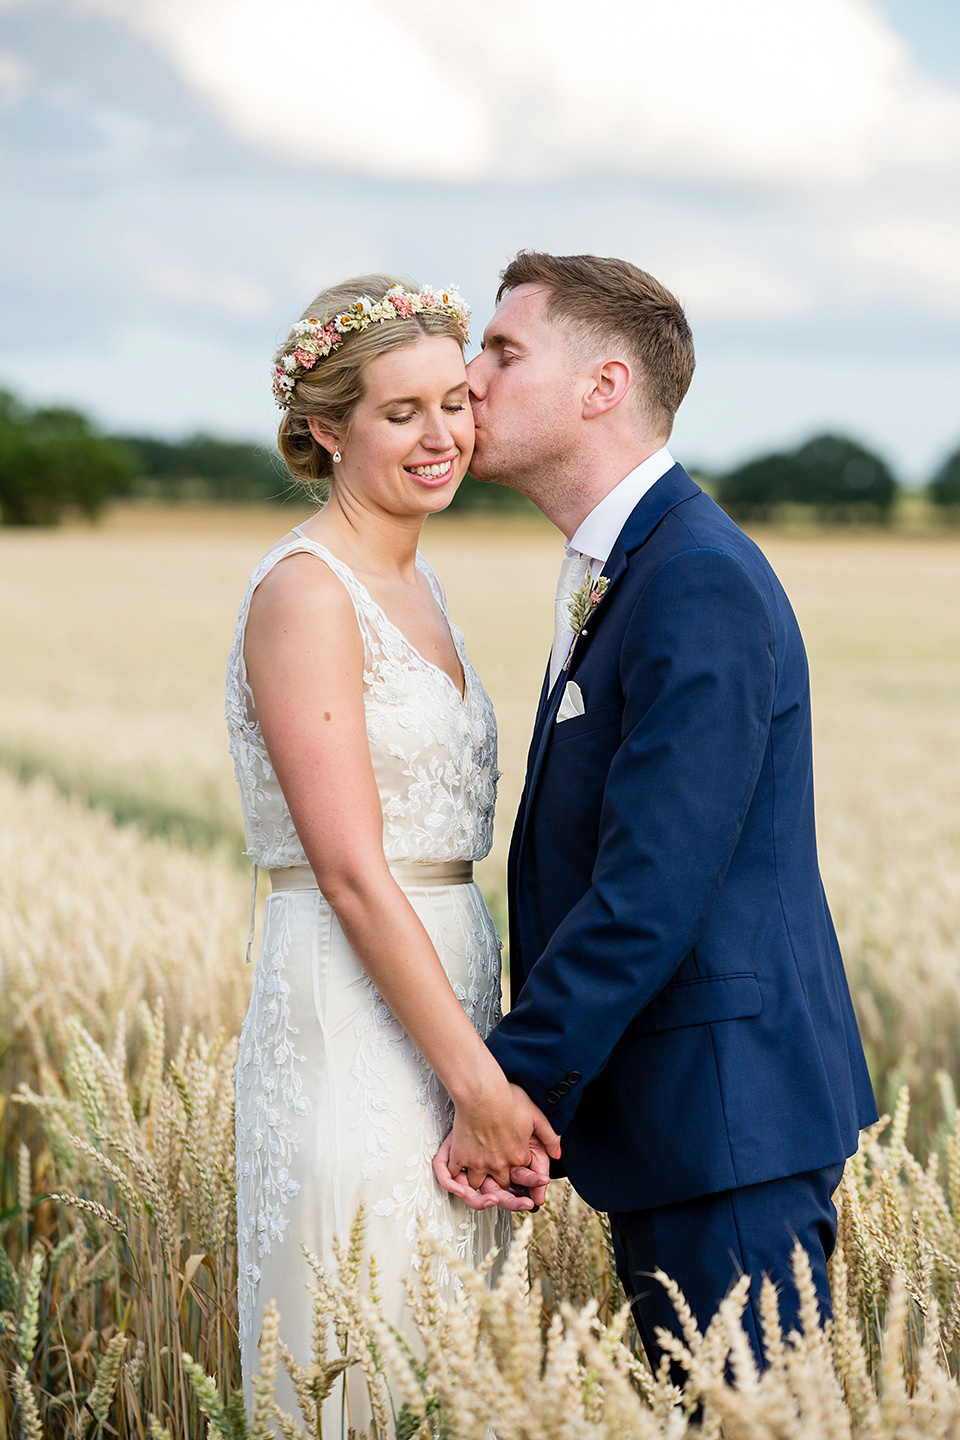 A Rustic Barn Wedding With a Bride in Catherine Deane and a Dried Flower Crown. Photography by Jo Hastings.